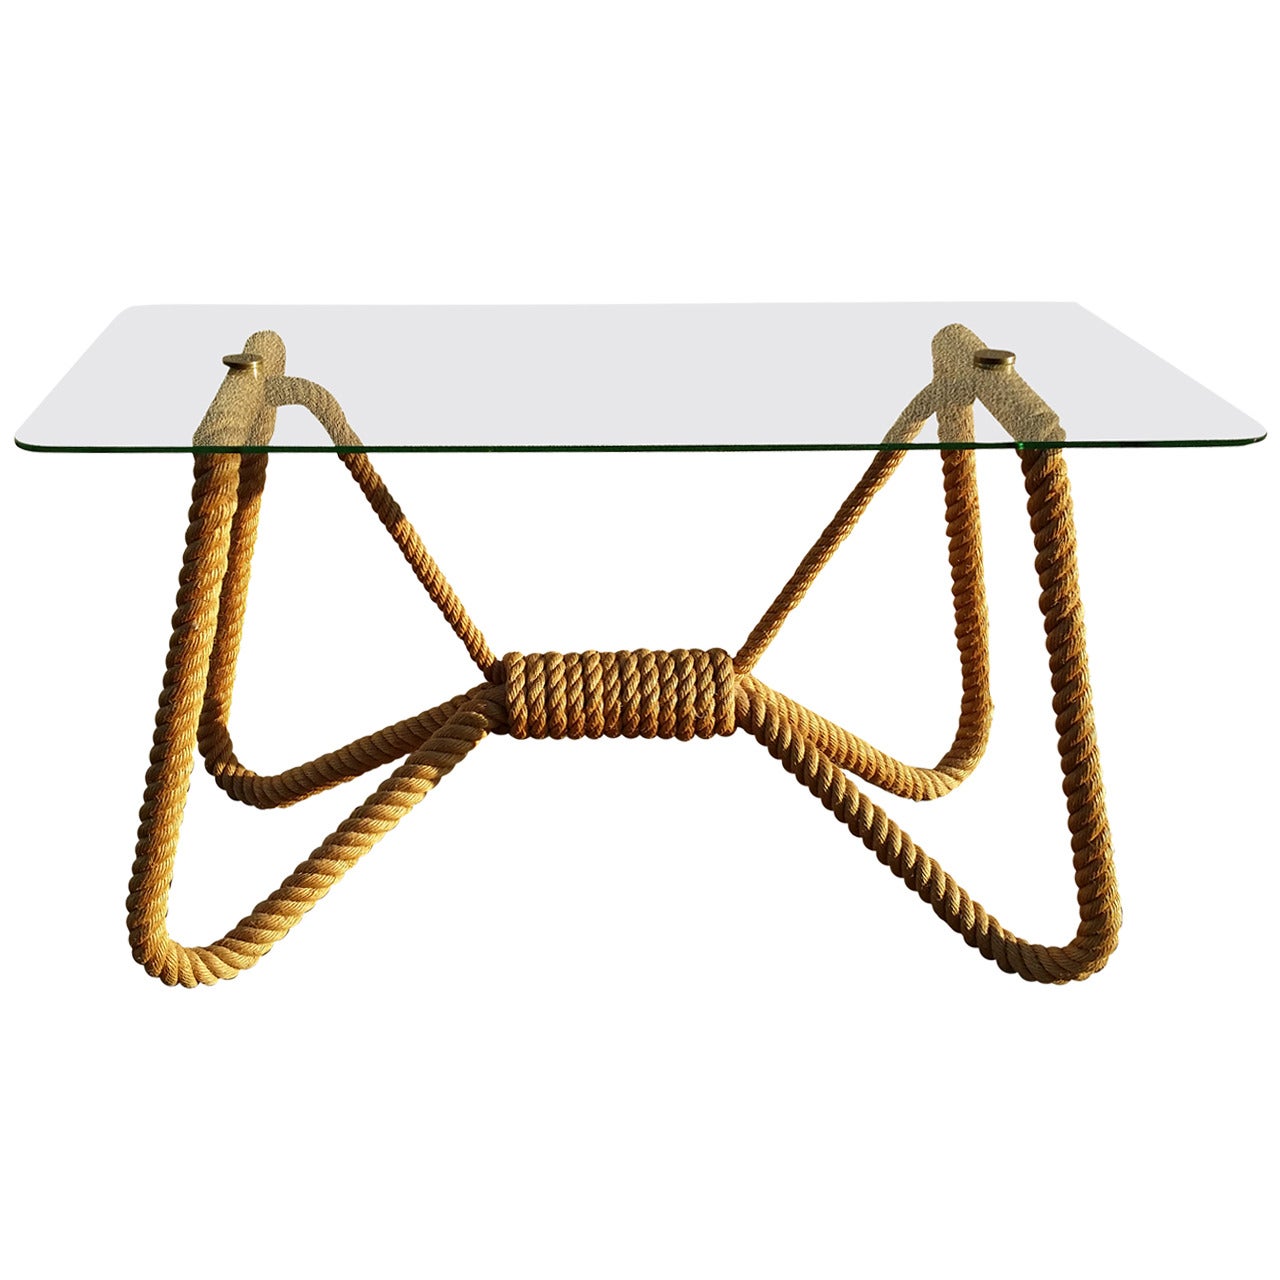 Very Rare Table by Audoux Minet, Golfe-Juan, France, 1960s, Ipso Facto